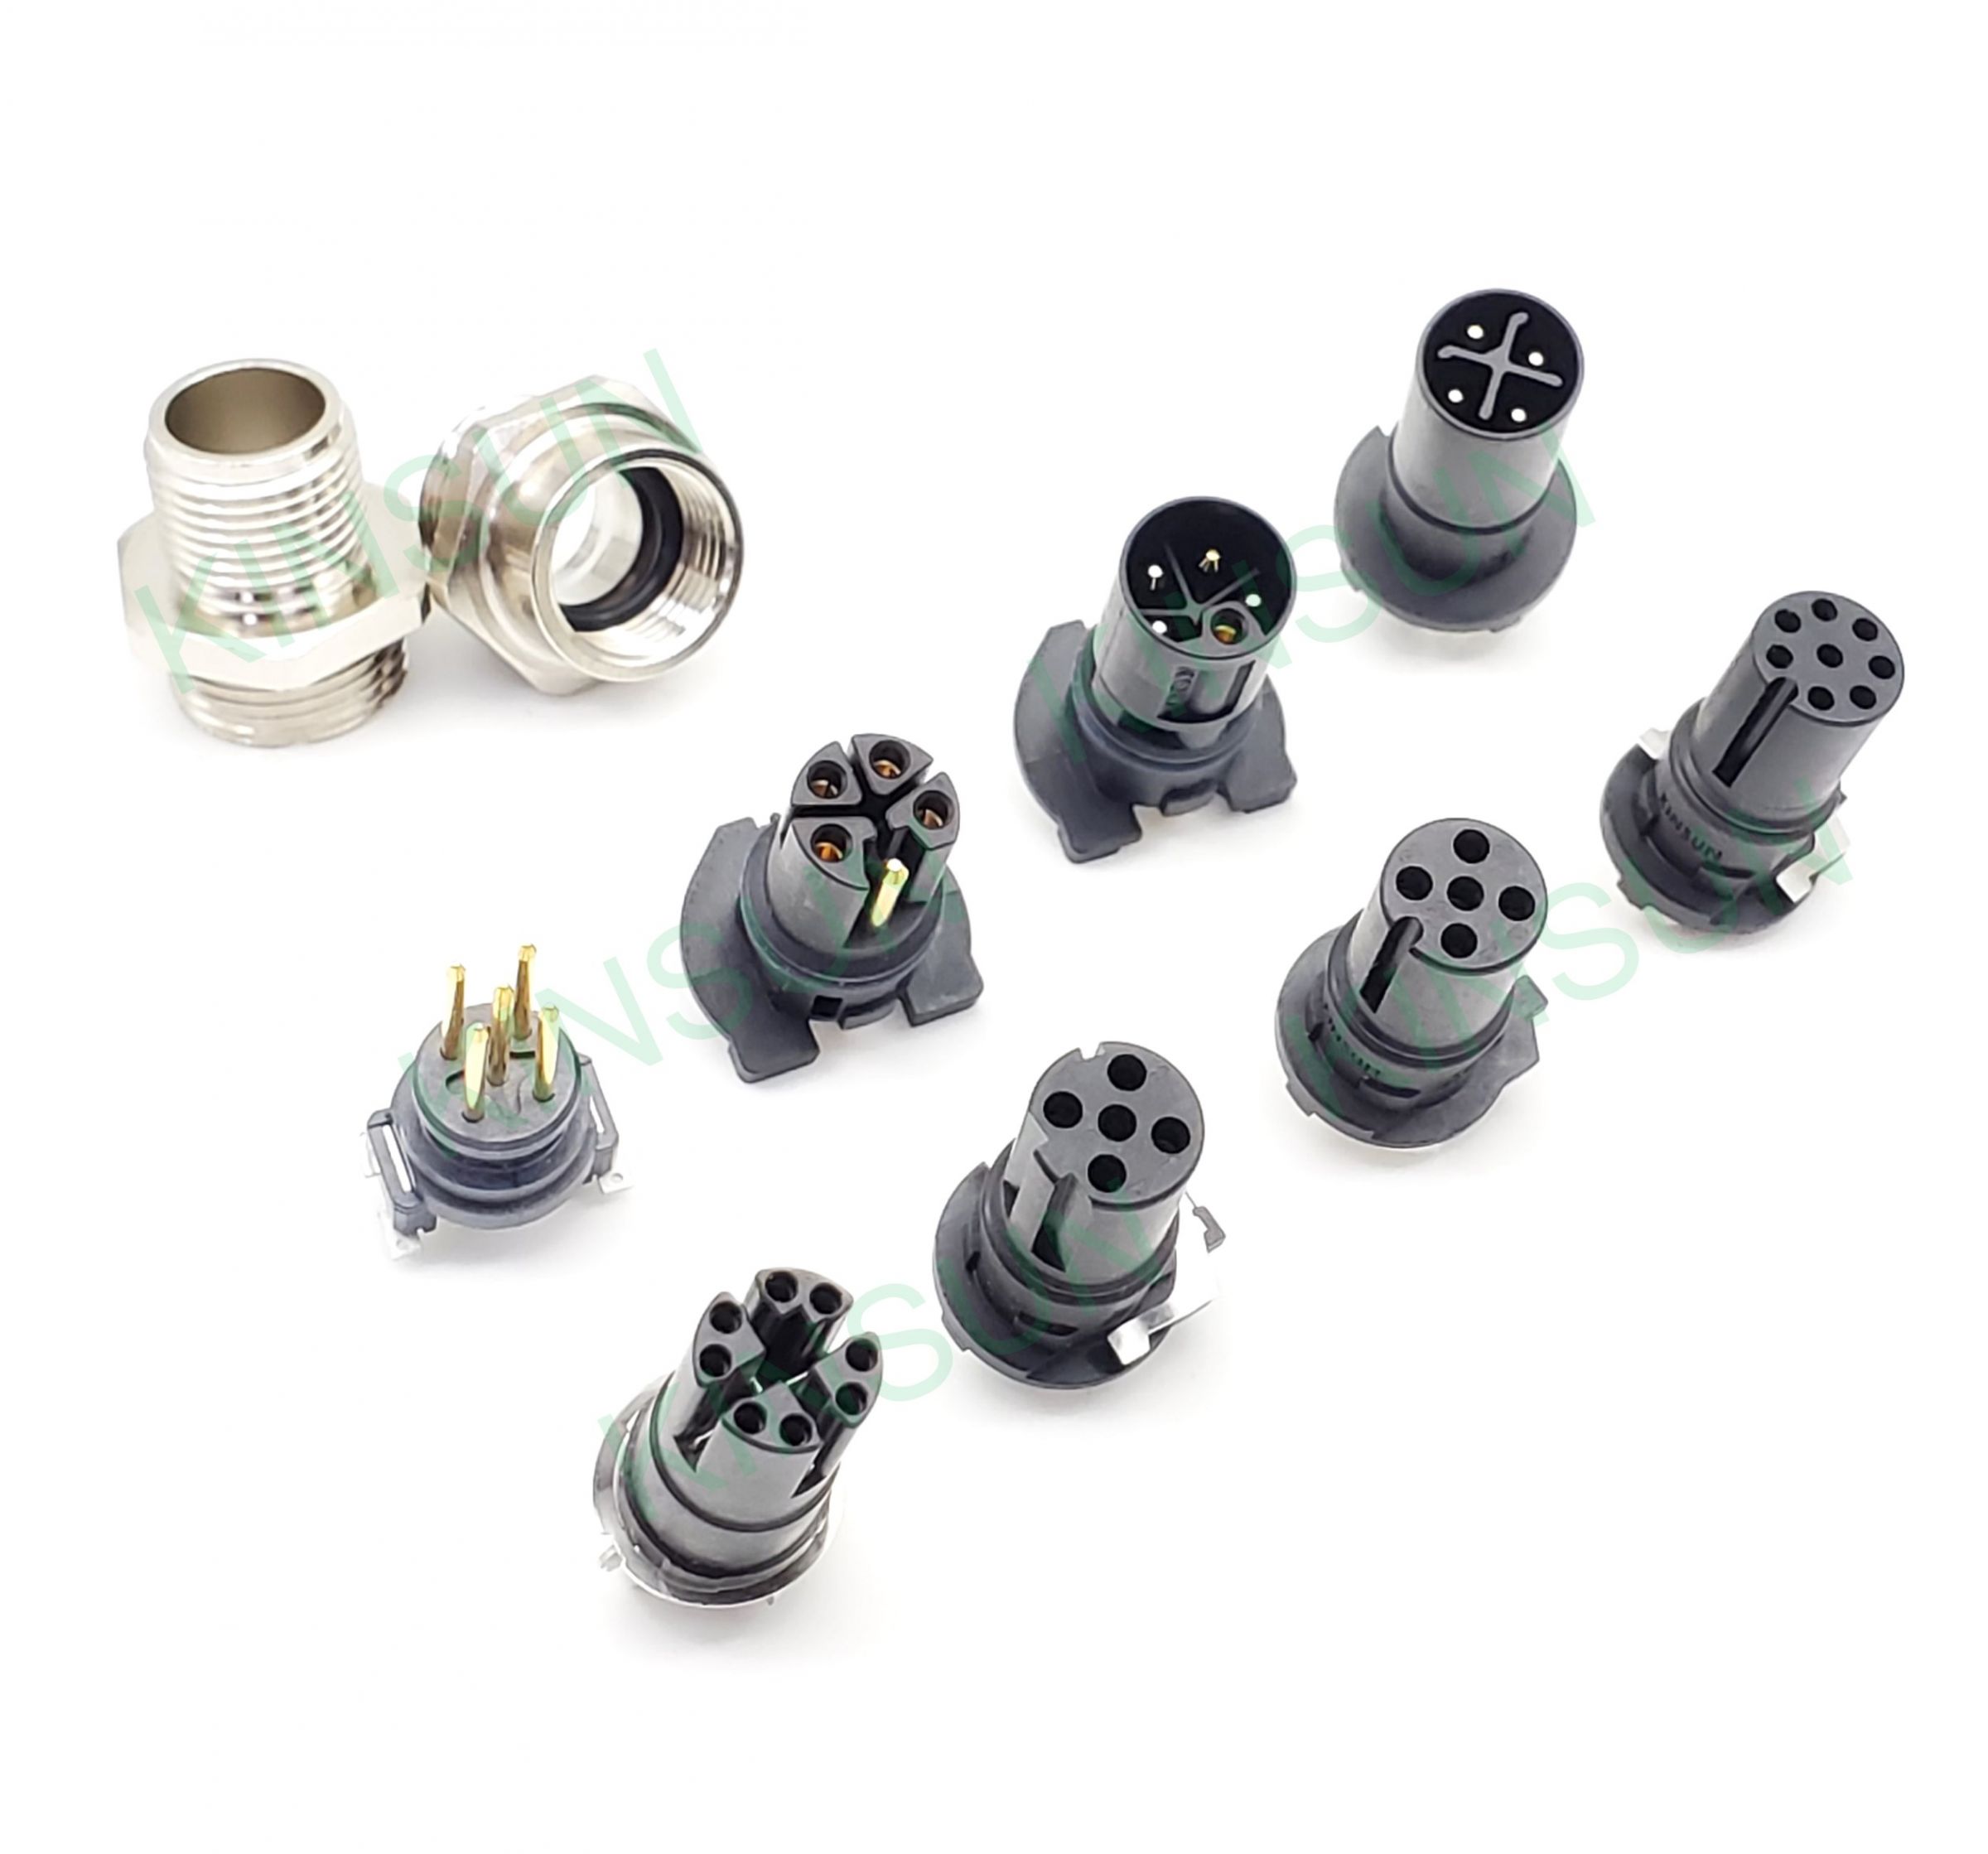 The two-piece M12 THR/SMD version connectors feature the advantages of space-saving, automatic pick-and-place assembly, and tolerance compensation. There are multiple codings such as M12 A-, B-, D-, X-, L-, and X-coding. The need for the screw connection for M12 plastic contact carriers can be a threaded fastening contour or directly integrating the thread into the front plate of modules.